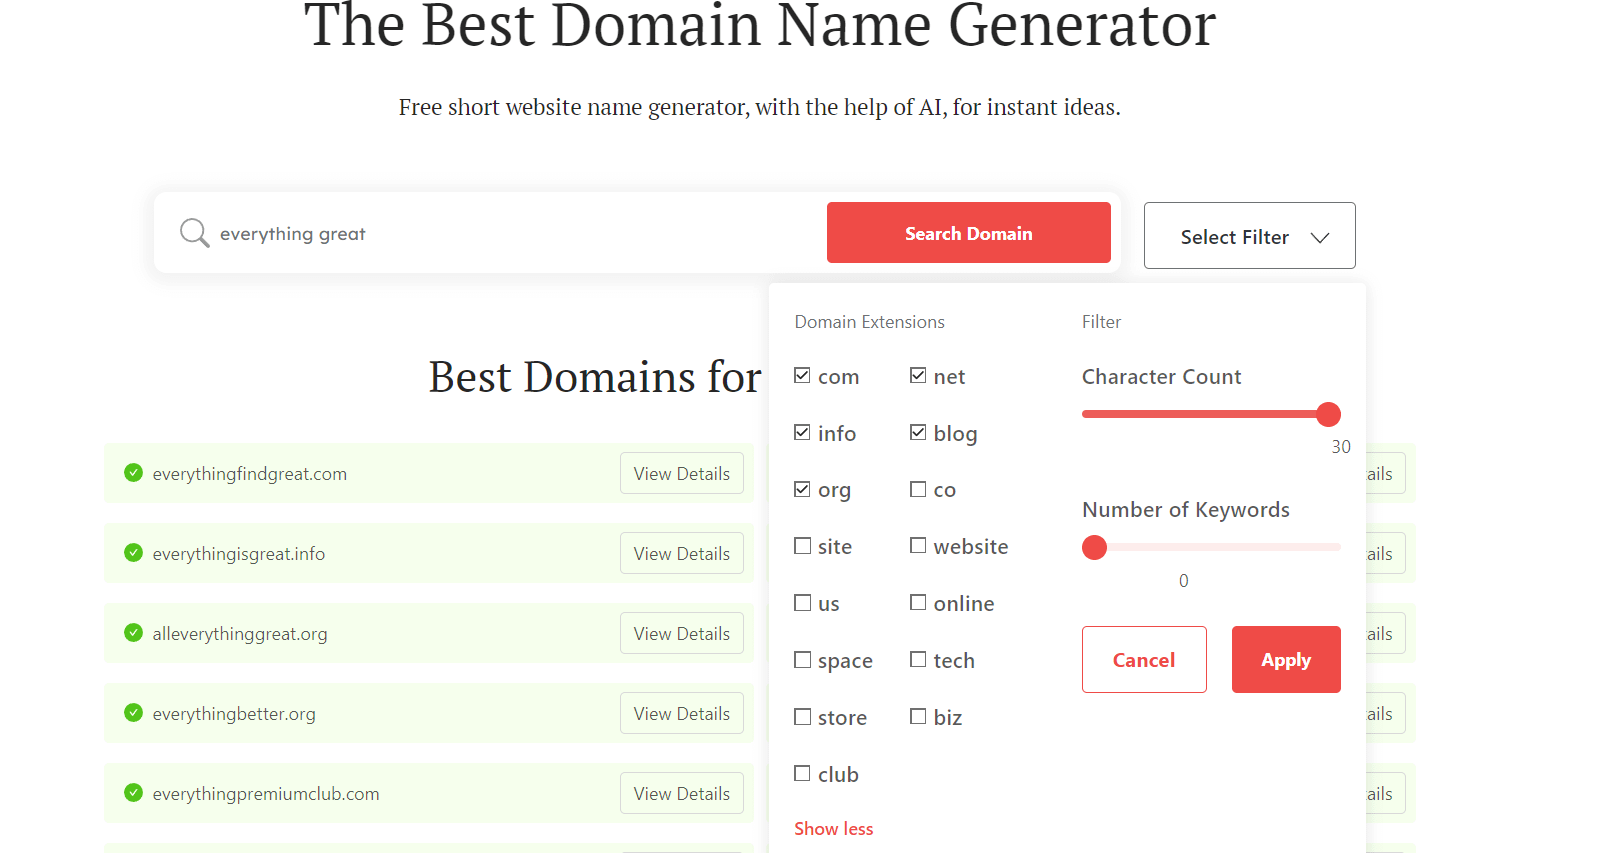 DomainWheel lifestyle blog names generator search filters for domain extension, character count, and number of keywords